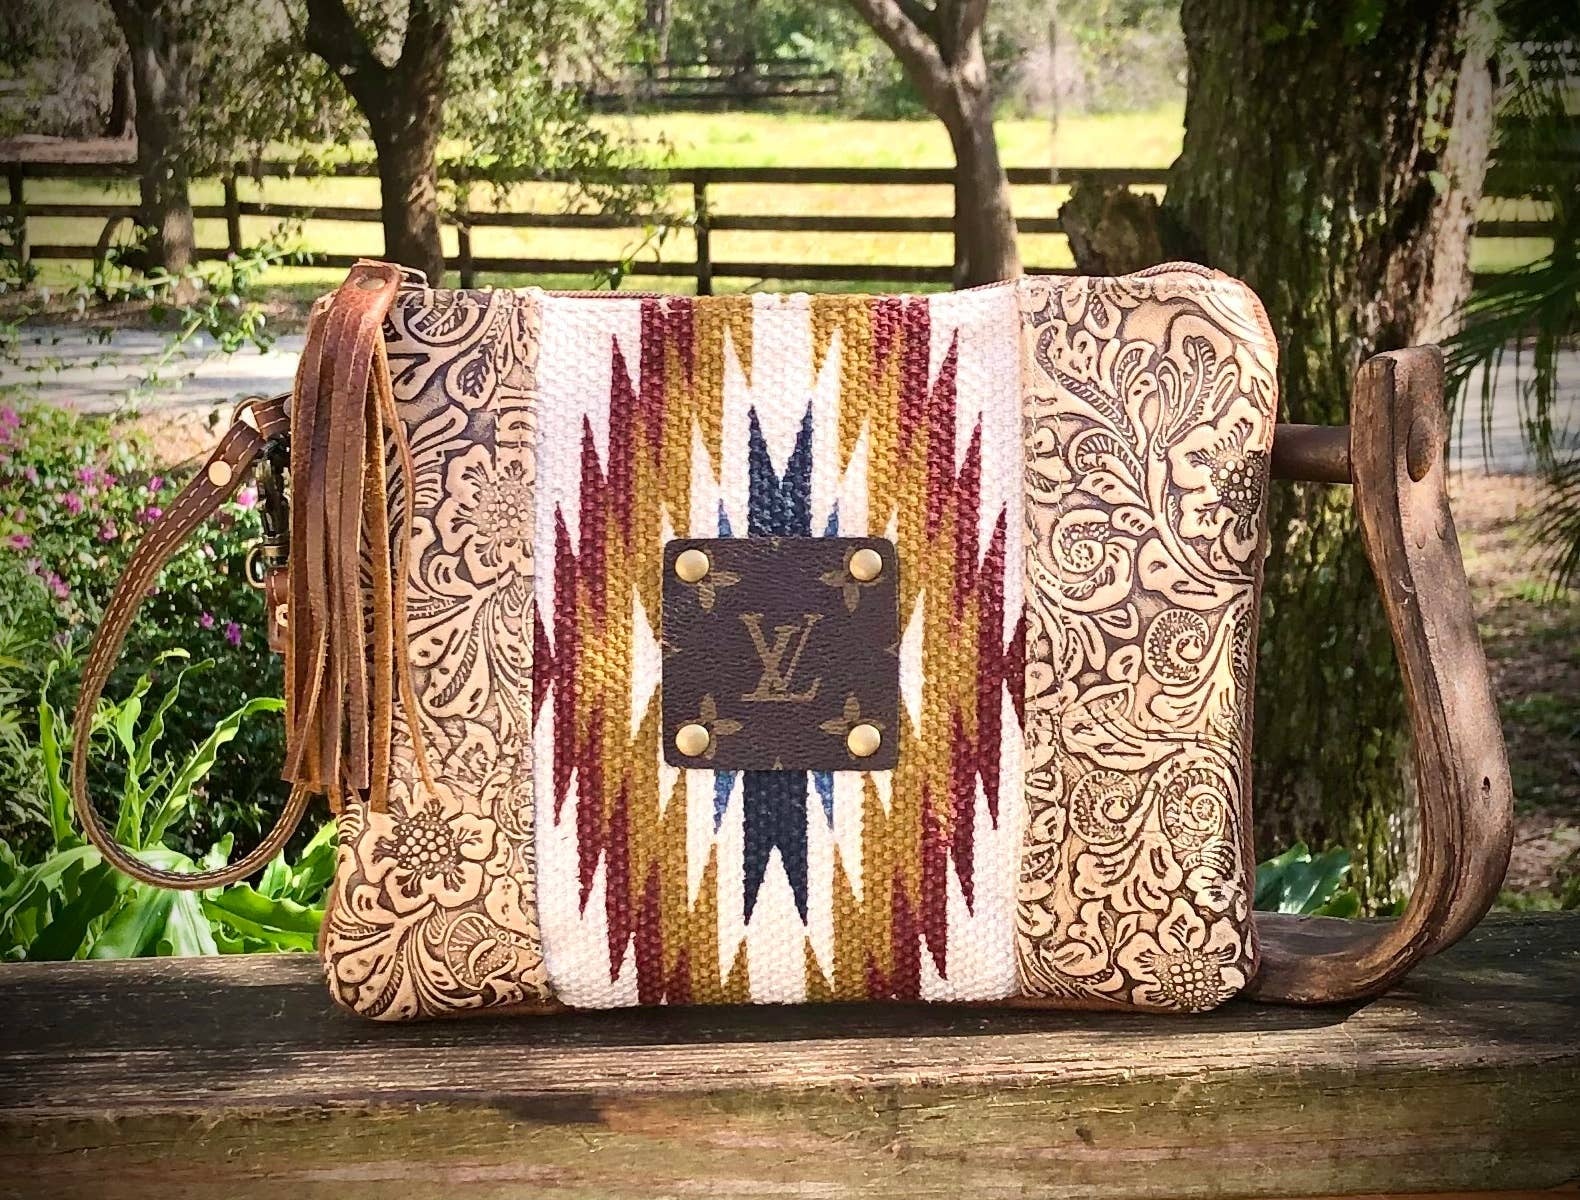 Western Handbags and Upcycled LV Acessories and Cowhide Koozies